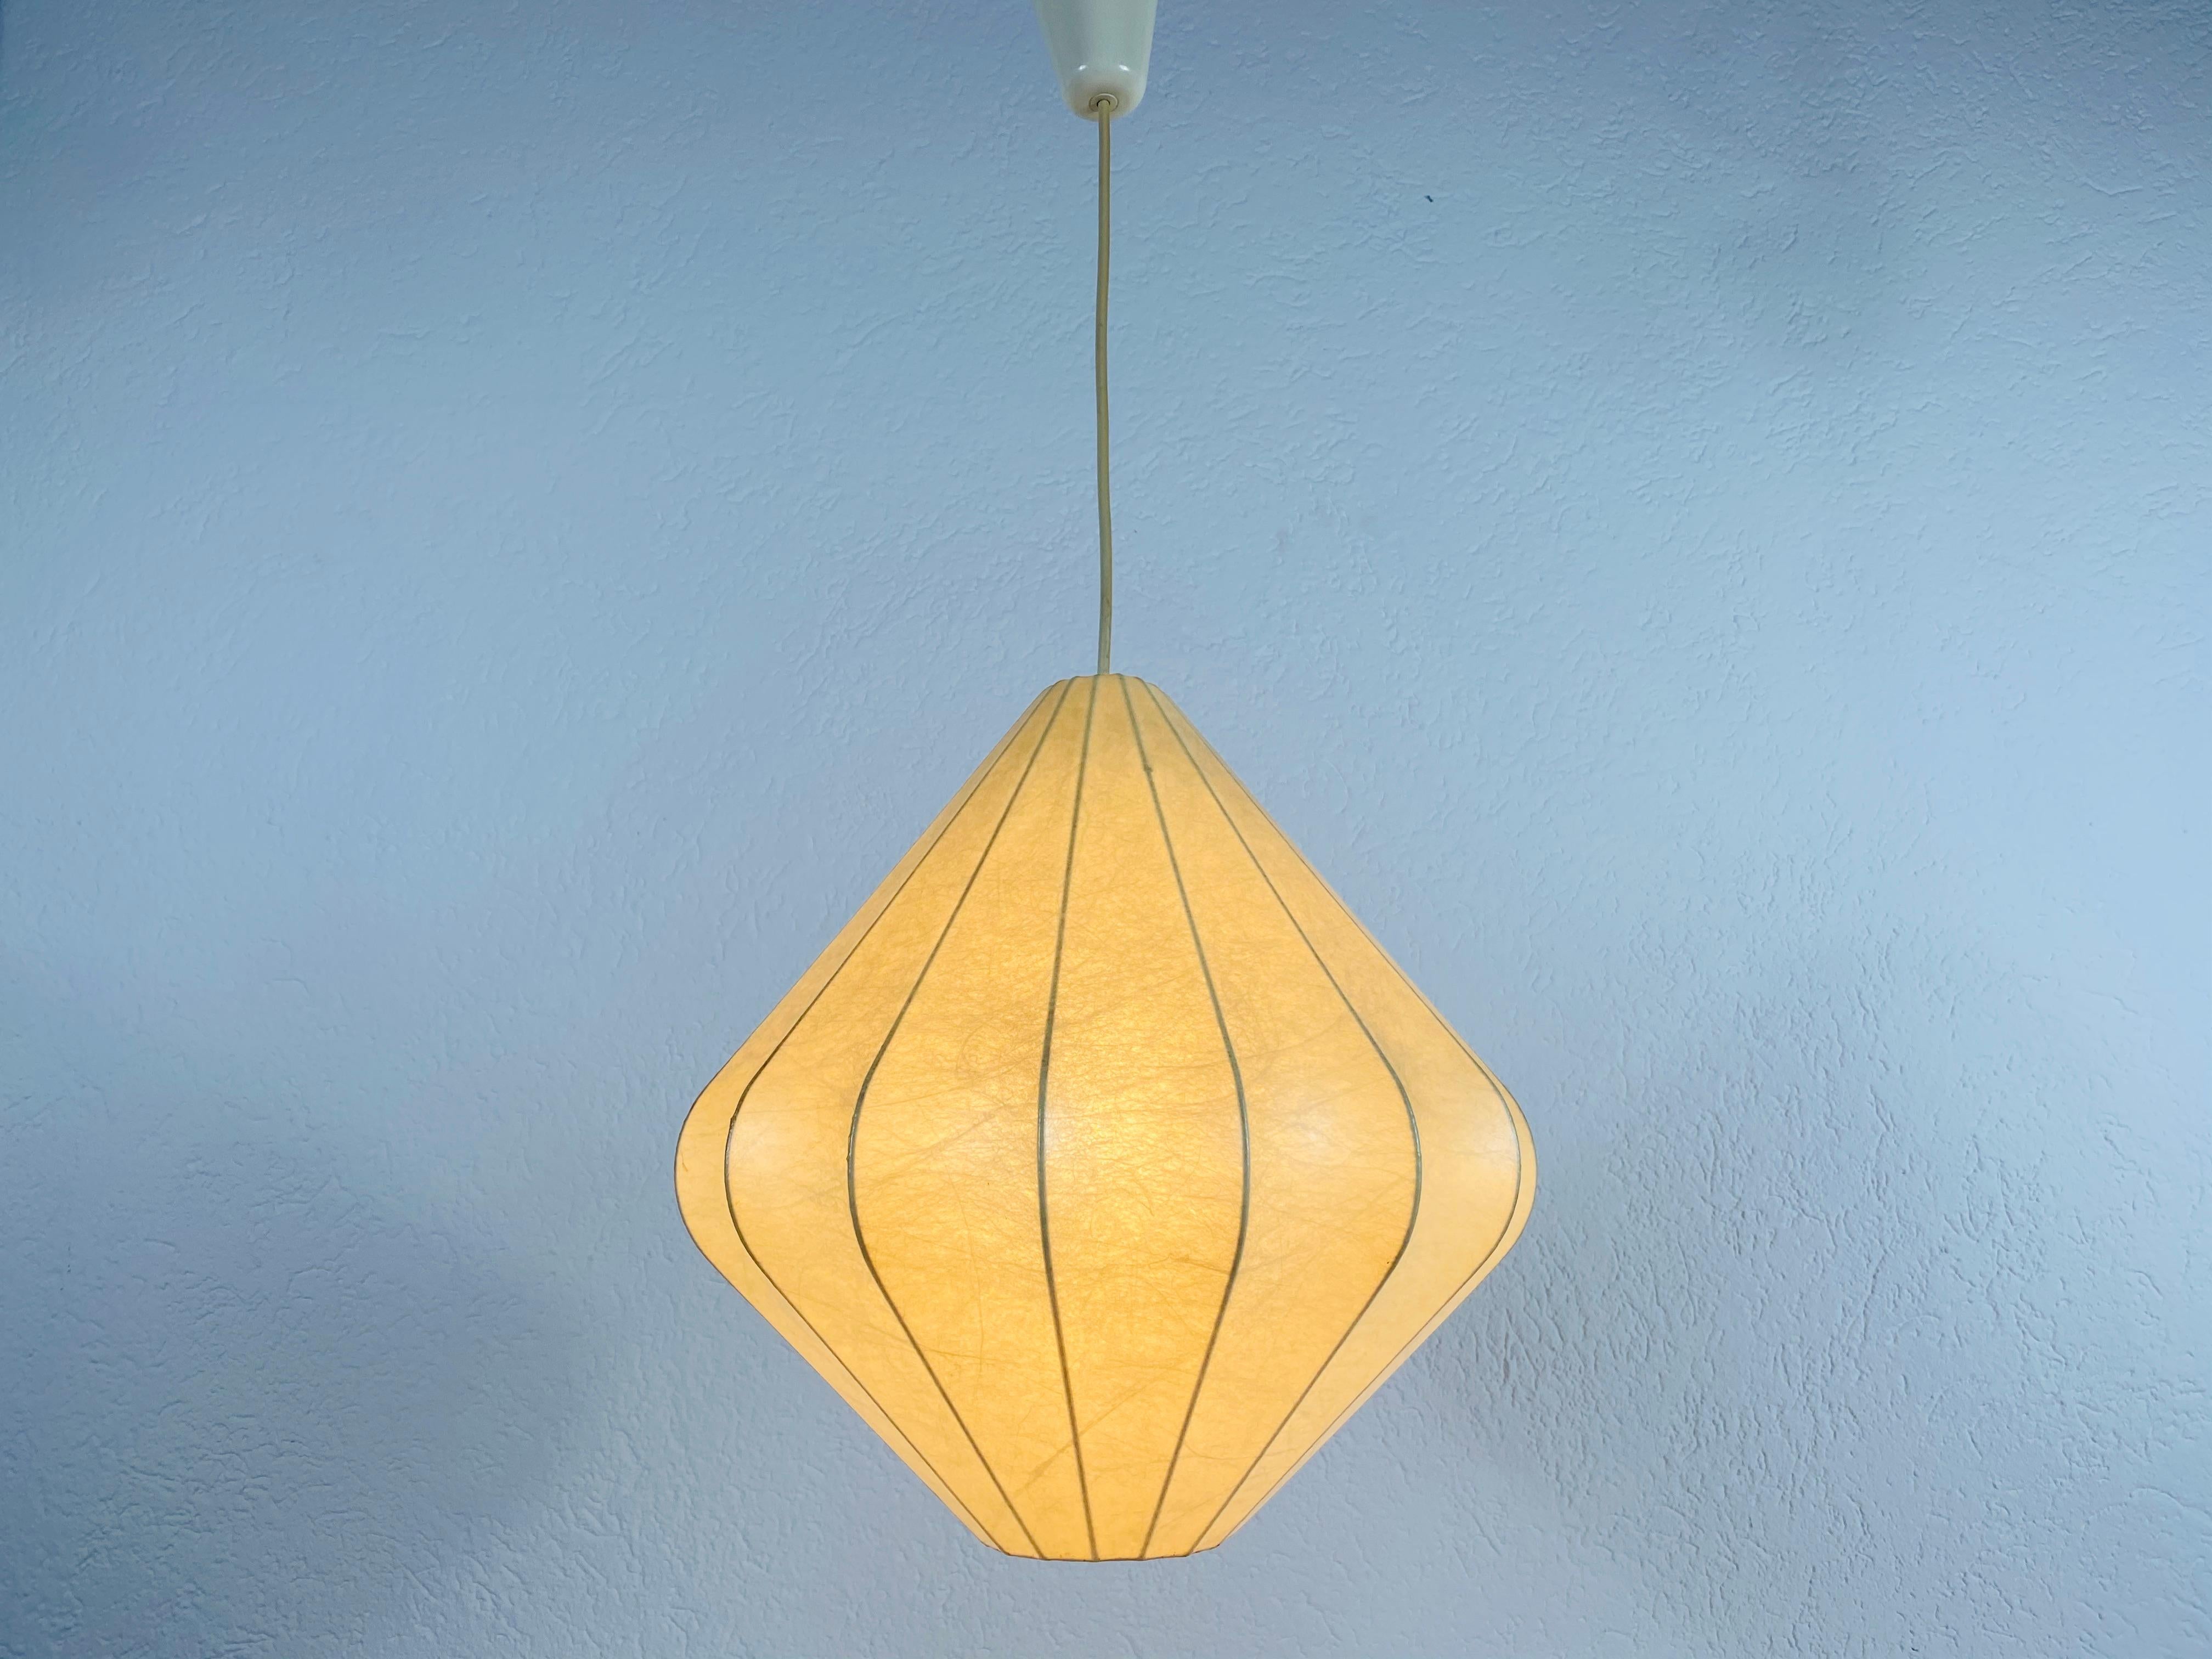 A cocoon pendant lamp made in Italy in the 1960s. The hanging lamp has been designed by Achille Castiglioni. The lamp shade is of original resin and has a flower shape.

Measures: Height 29-70 cm 
Diameter 34 cm

The light requires one E27 (US